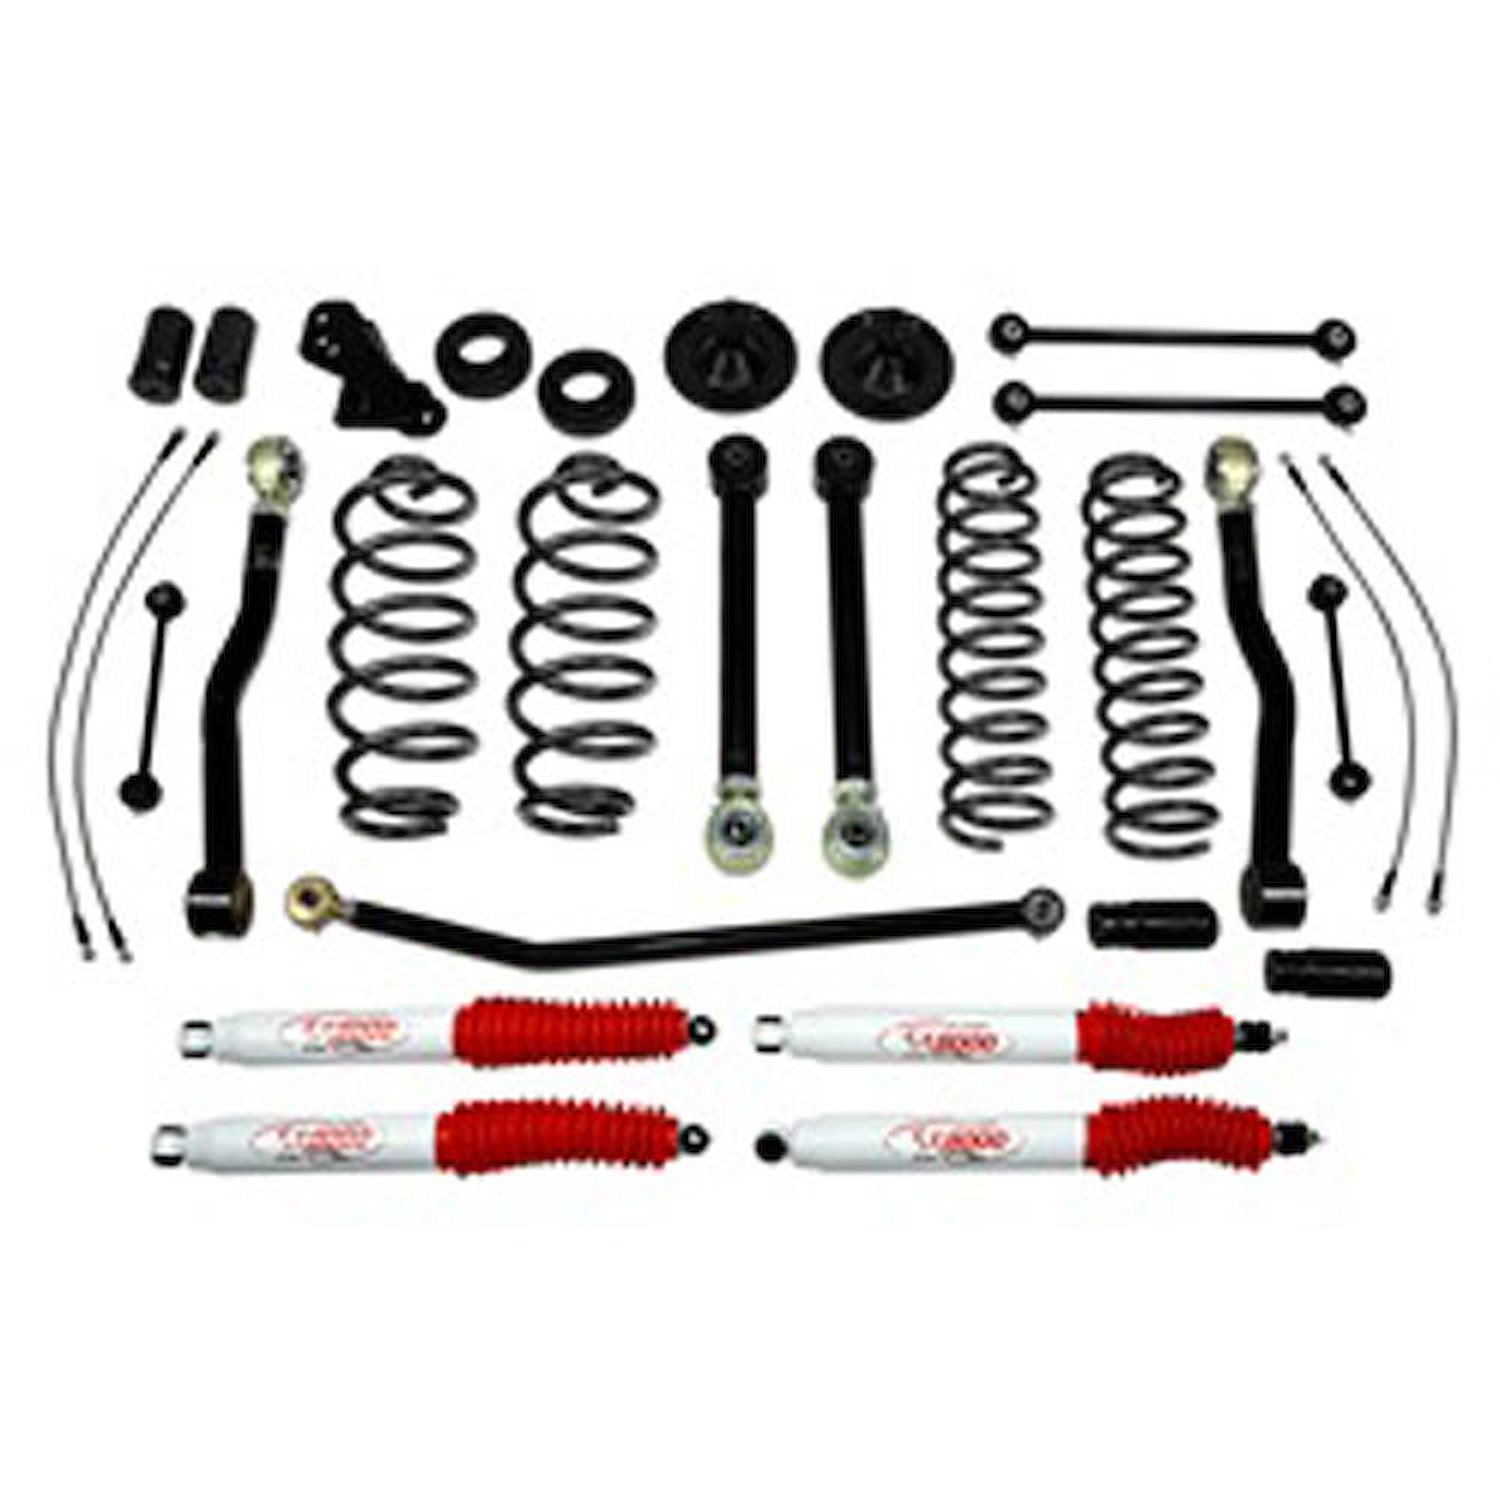 44000KN Front and Rear Suspension Lift Kit, Lift